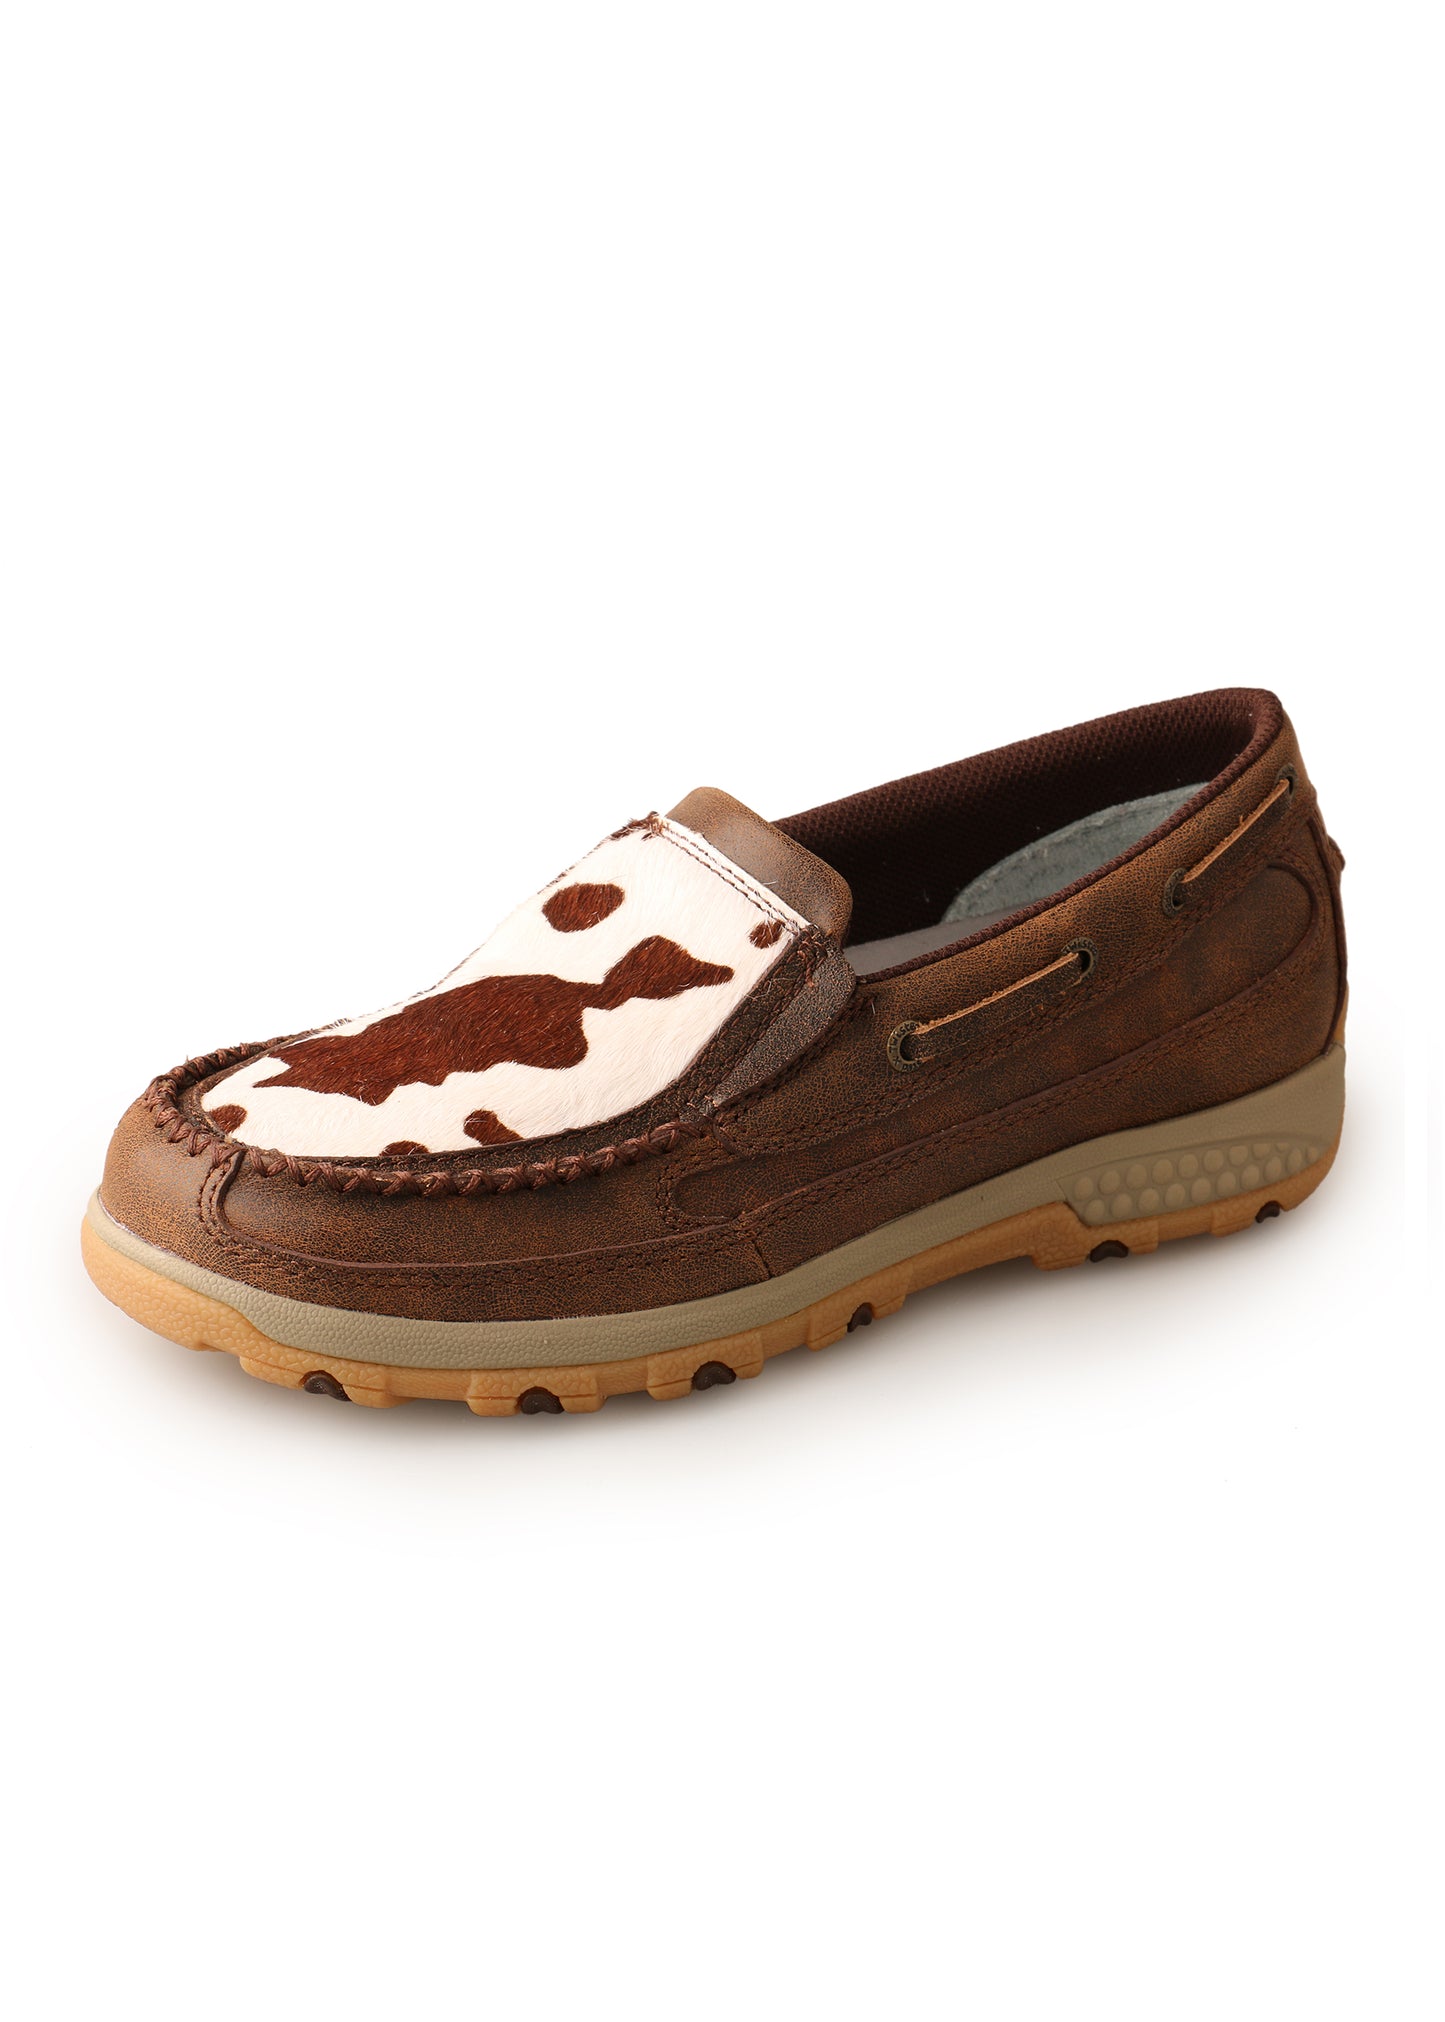 TCWXC0013 Twisted X Women's Cow Furcell Stretch Slip on